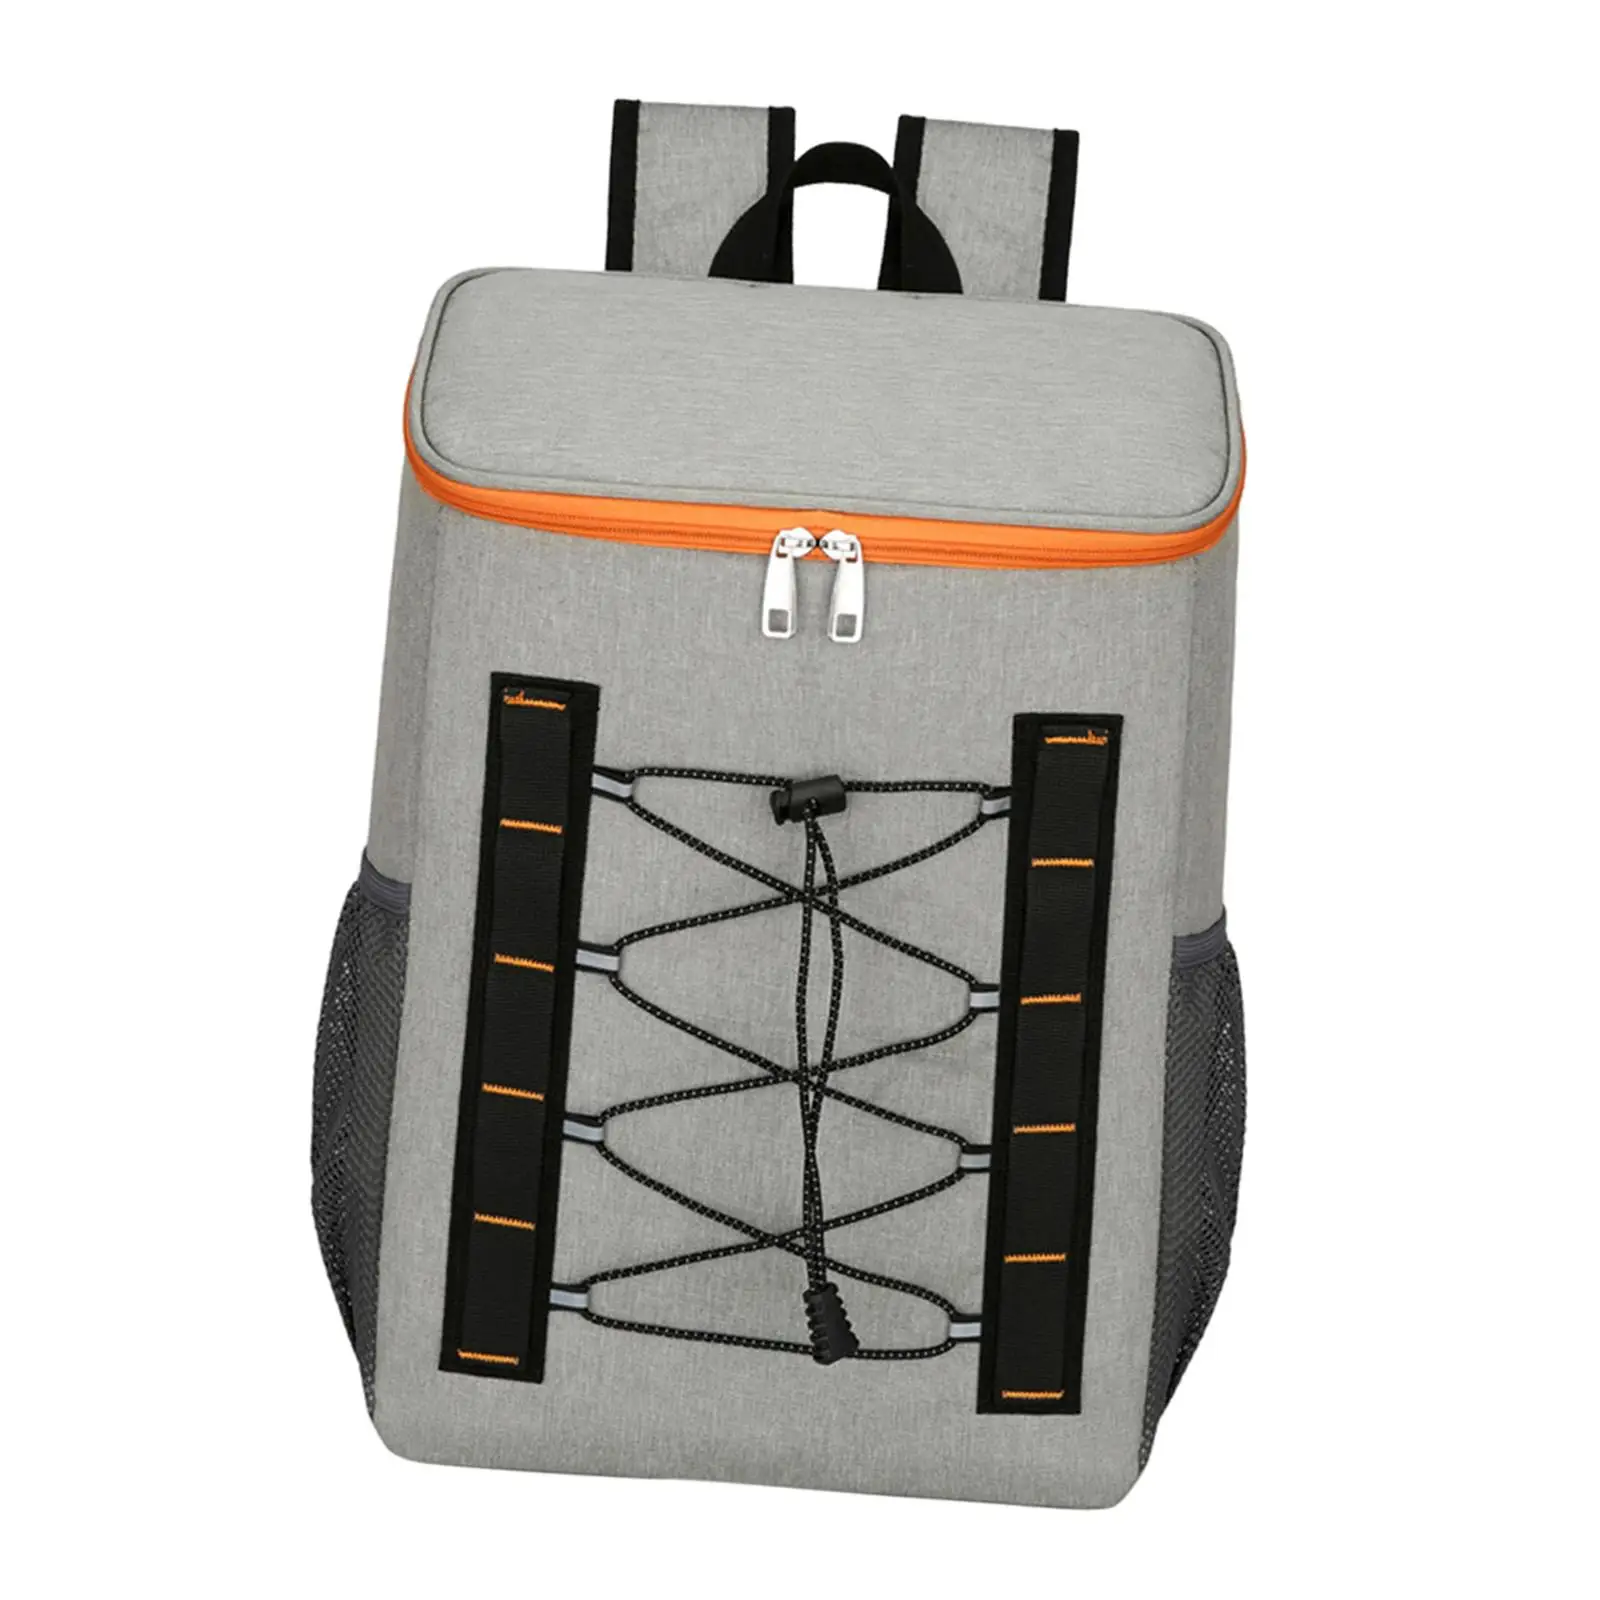 Outdoor Picnic Bag Mesh Pocket Waterproof Insulated Lunch Backpack for Trips